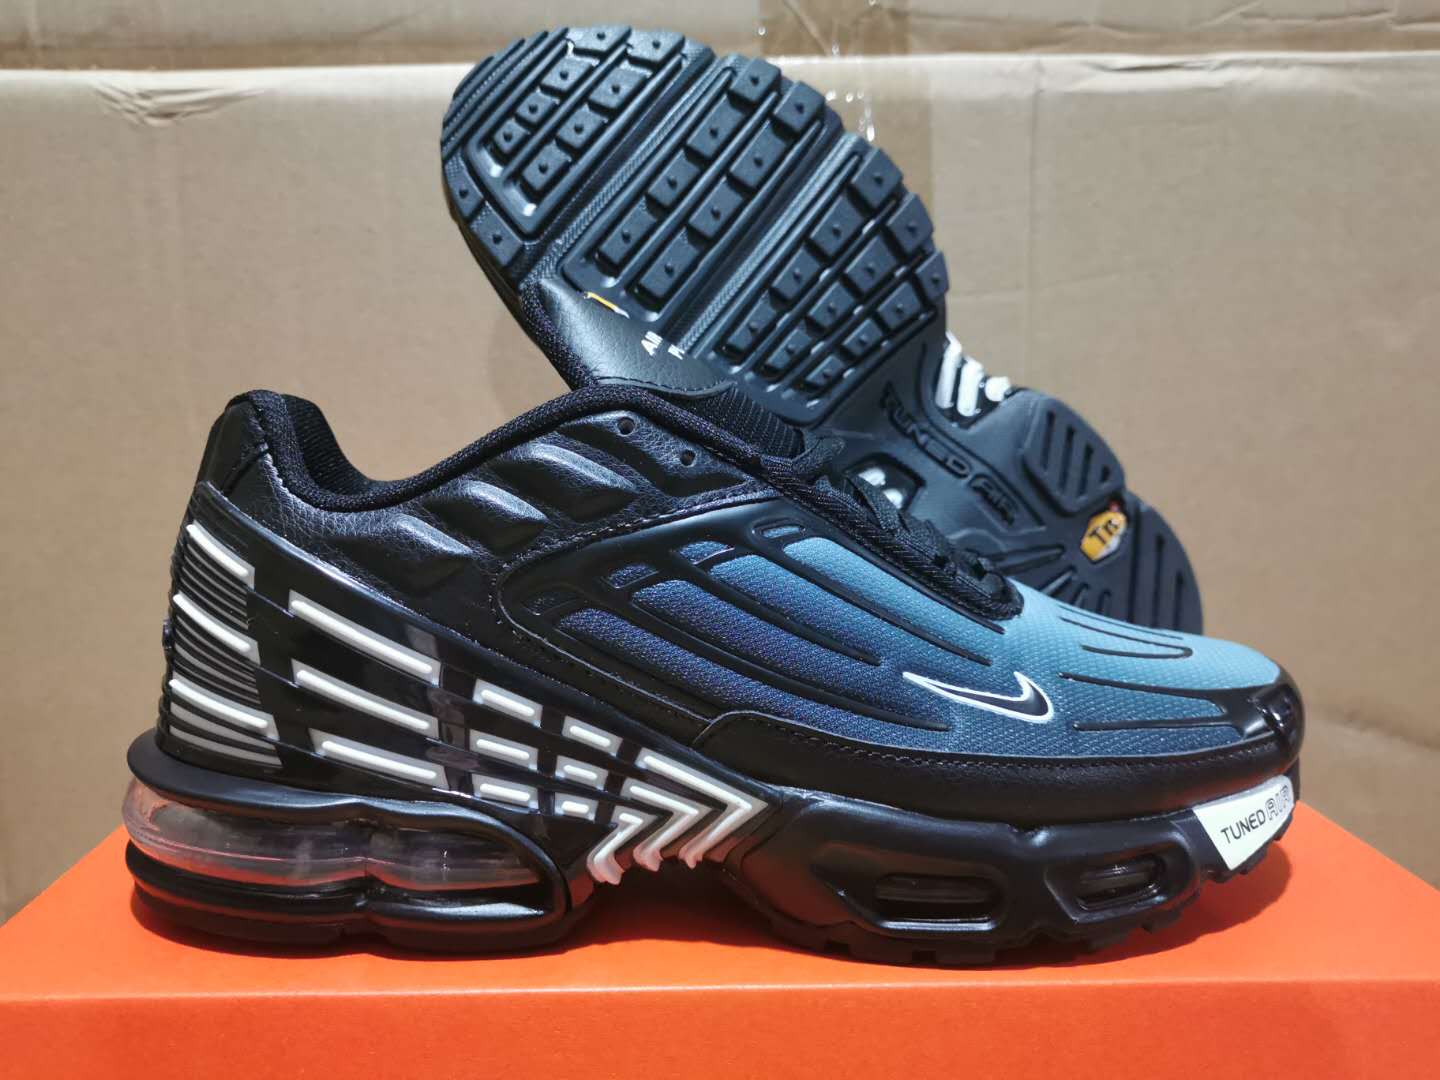 Men's Hot sale Running weapon Air Max TN Shoes 173